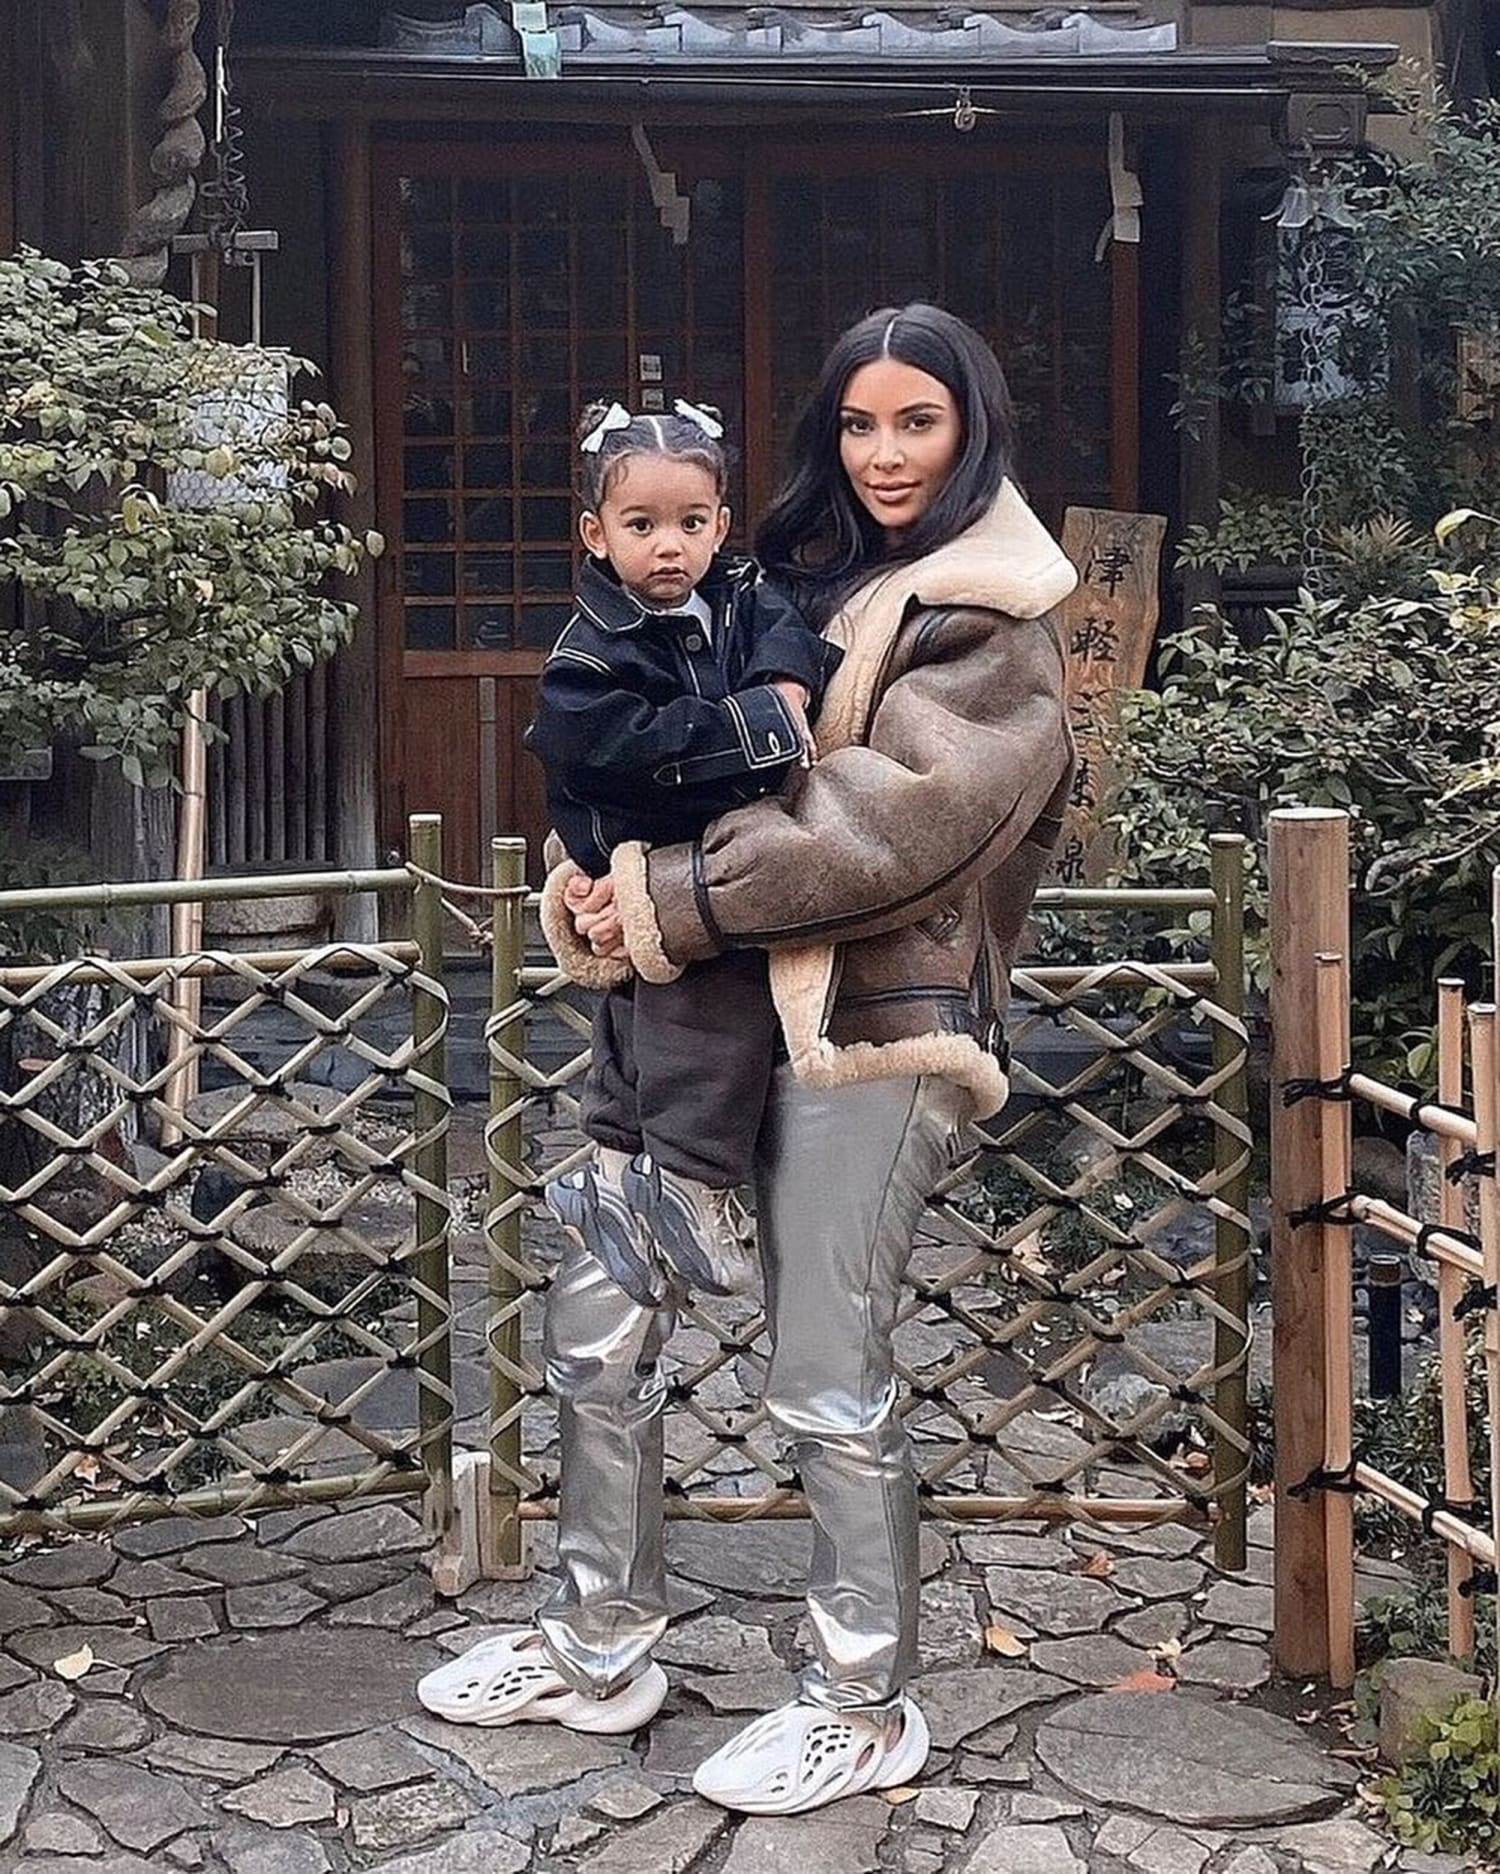 Kim Kardashian West Shares Sweet Pics of Daughter Chicago for Her 4th Birthday